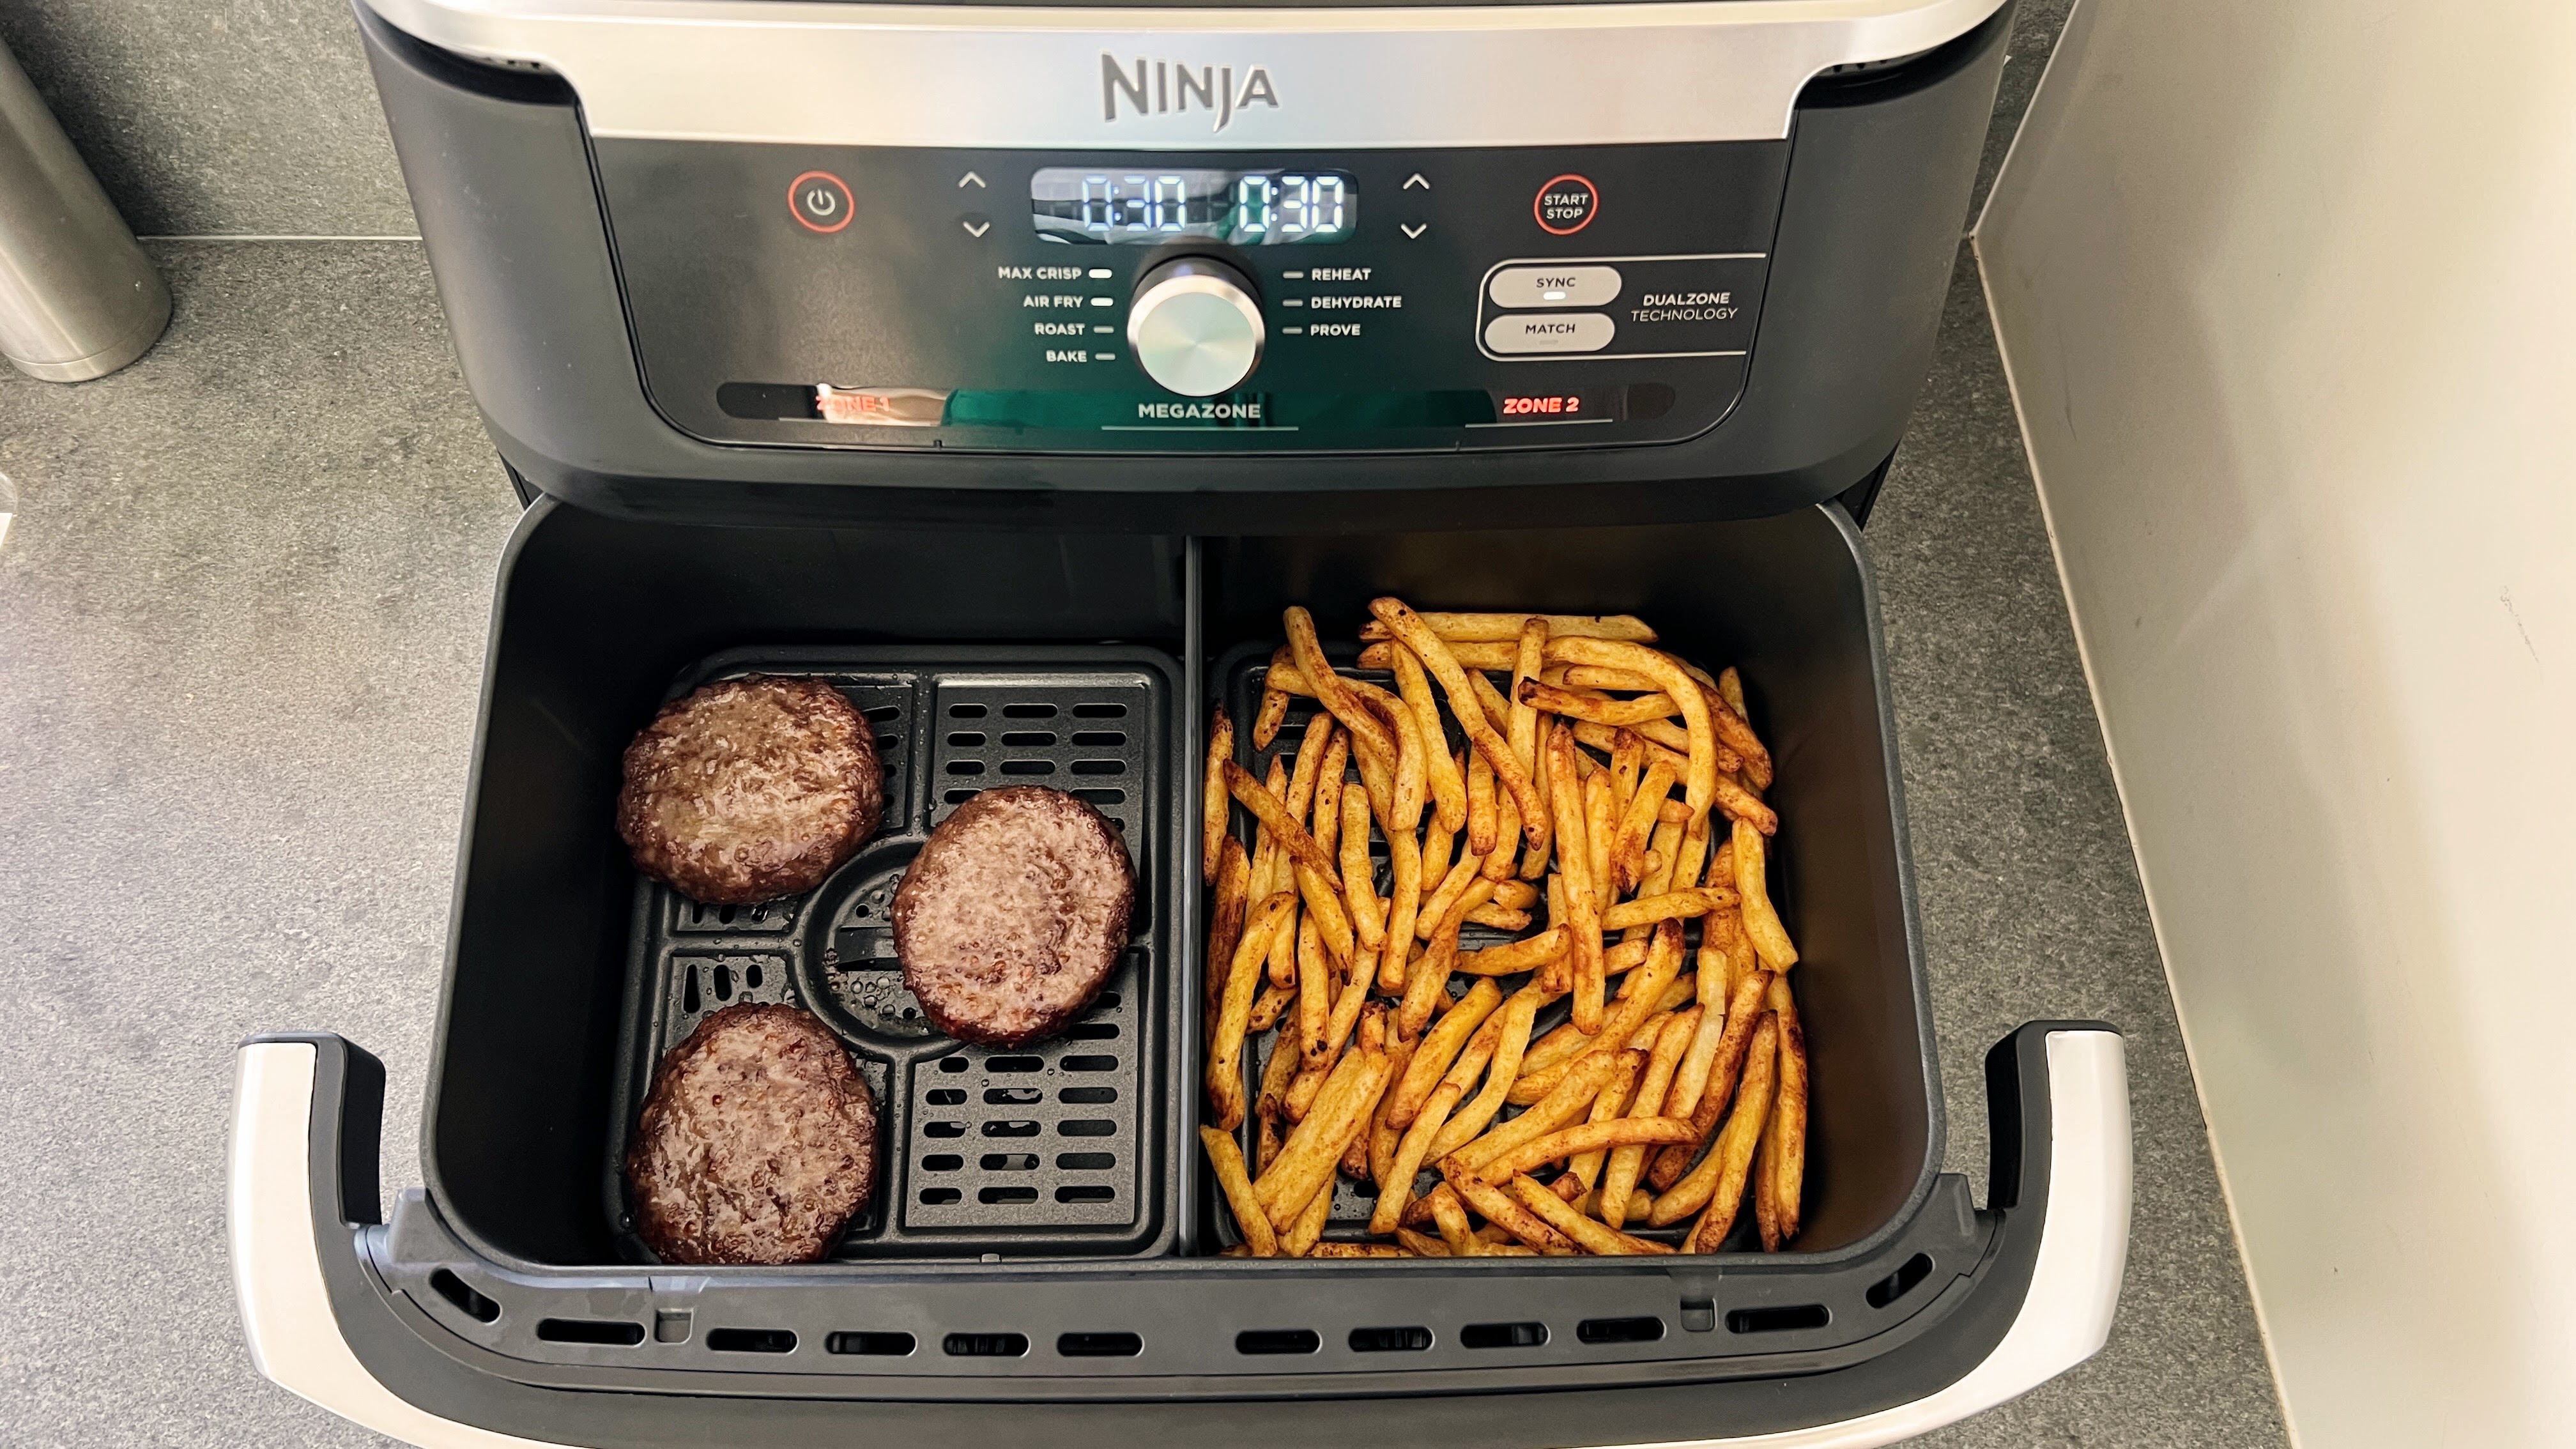 Cosori Dual Blaze Air Fryer Does It Again - Budget Meal 